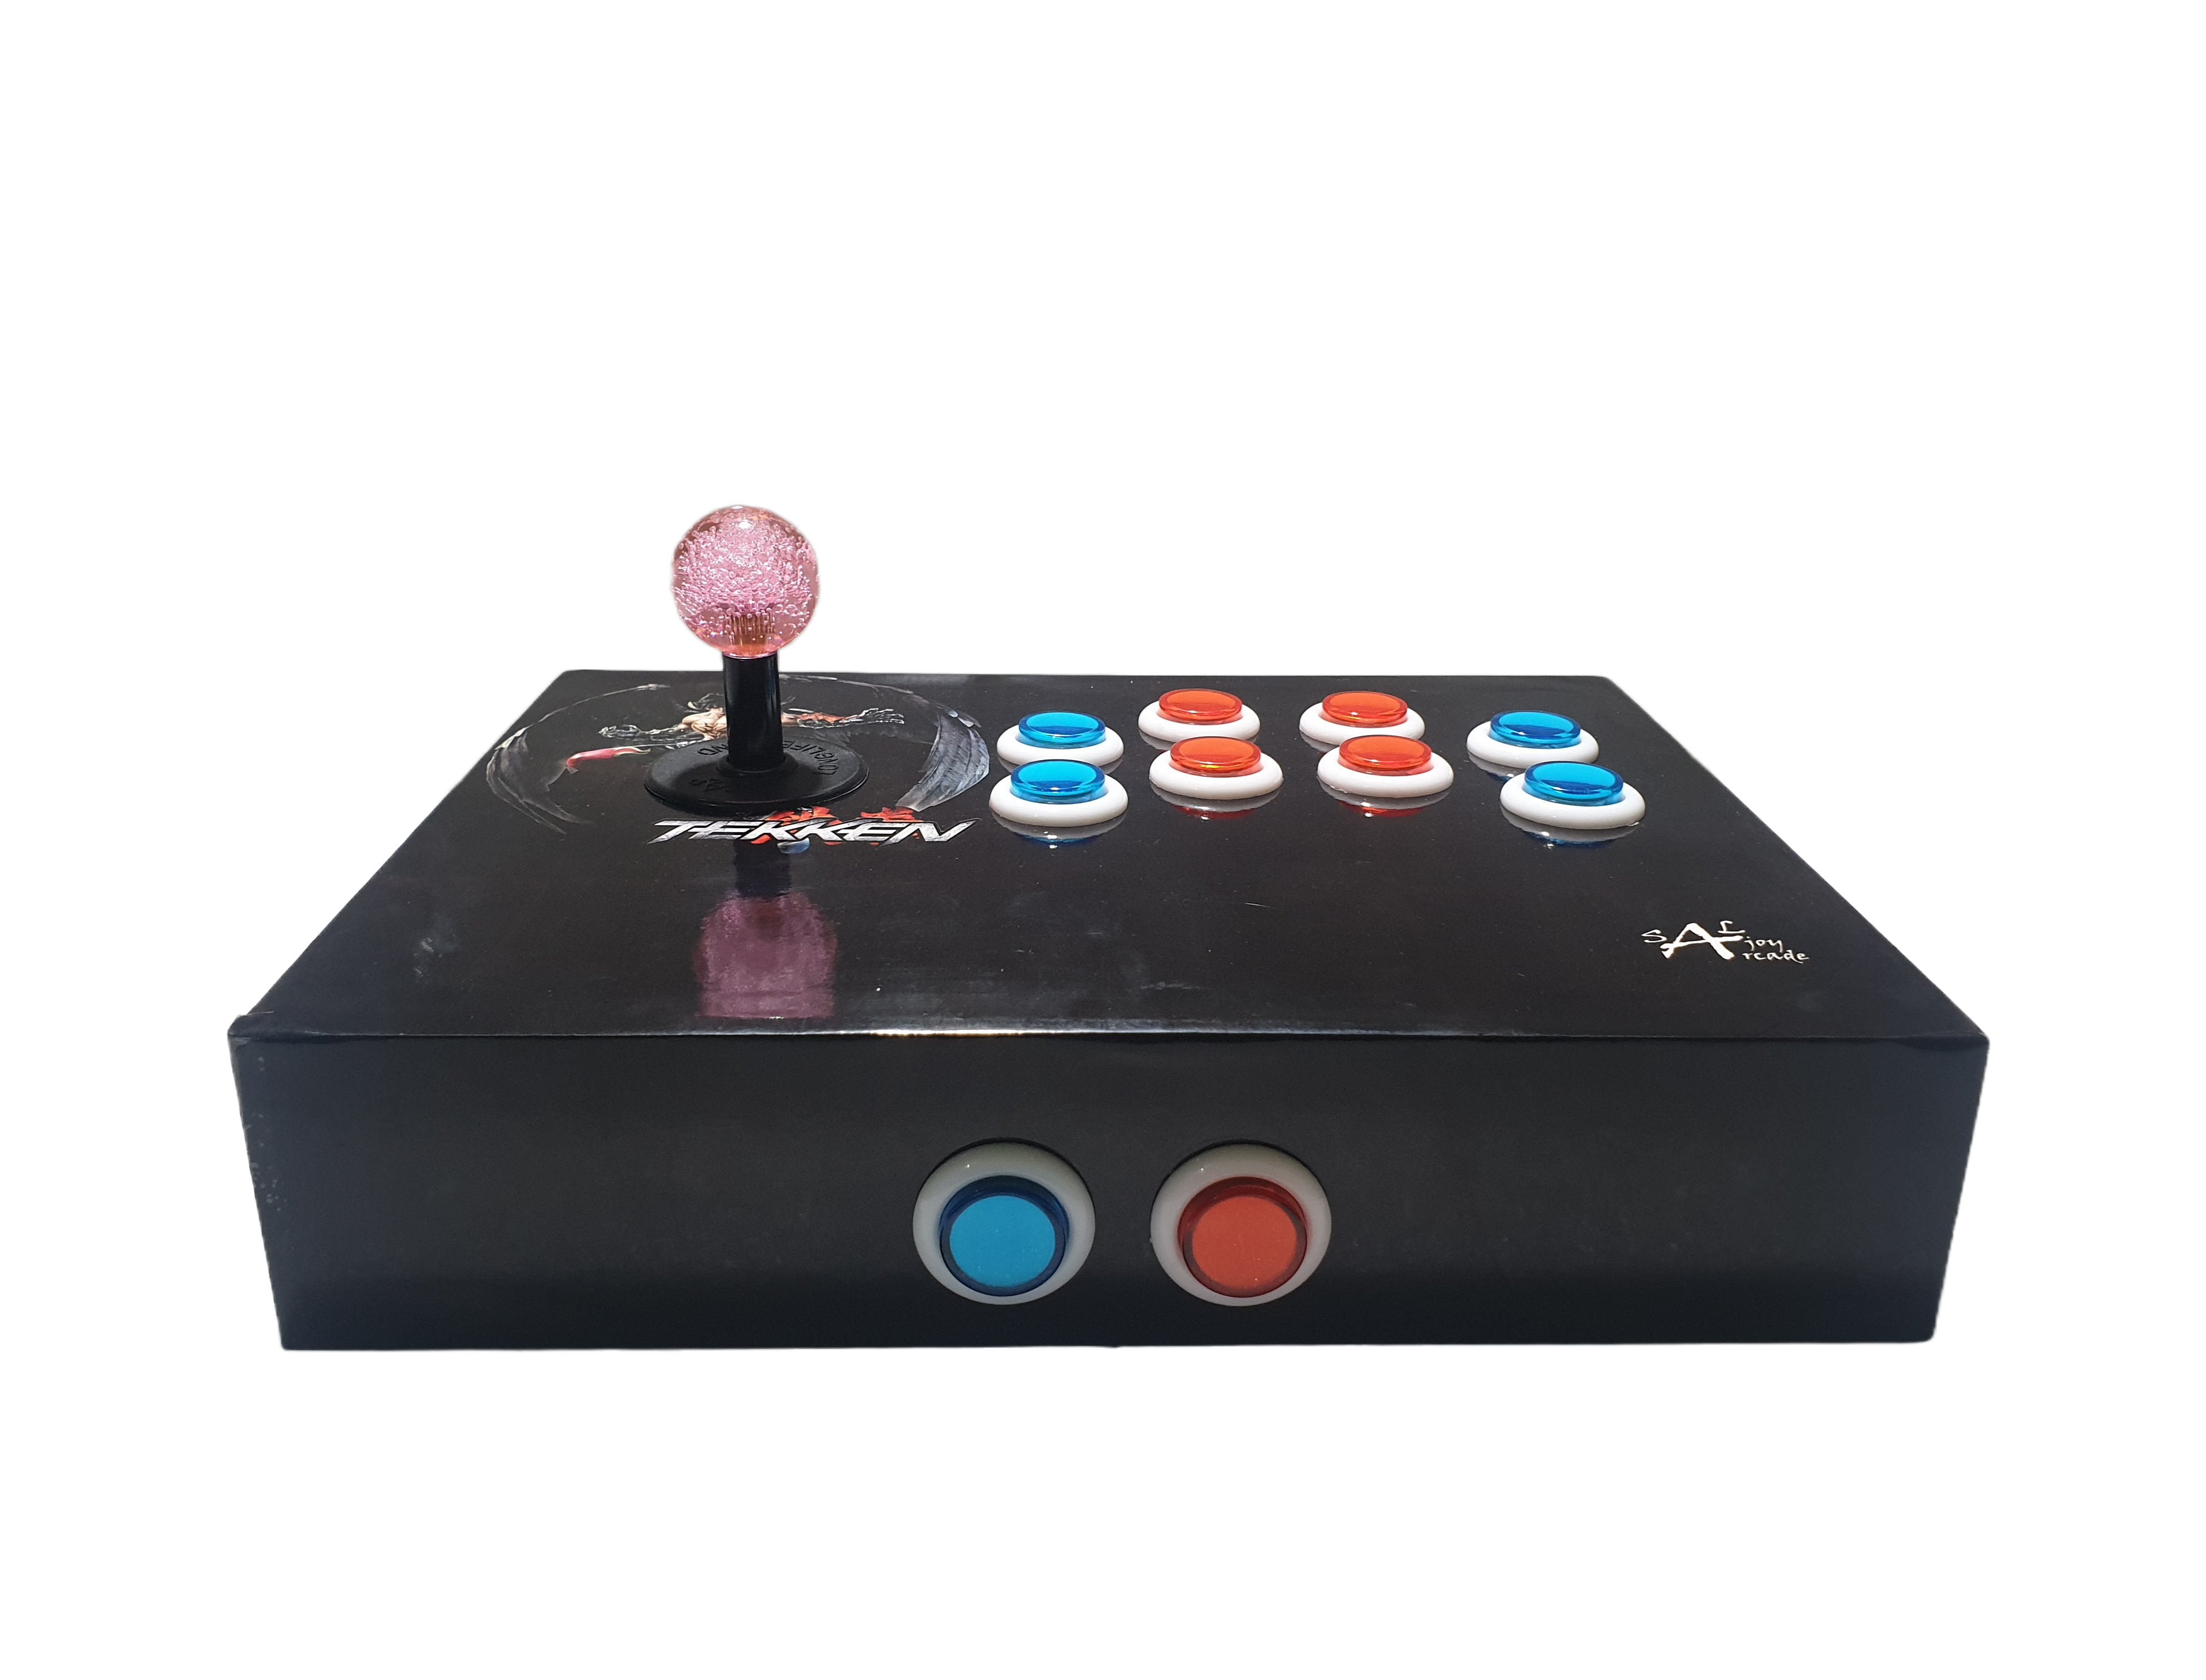 PC USB Arcade joystick for PS3, PC Windows and Android Mobiles